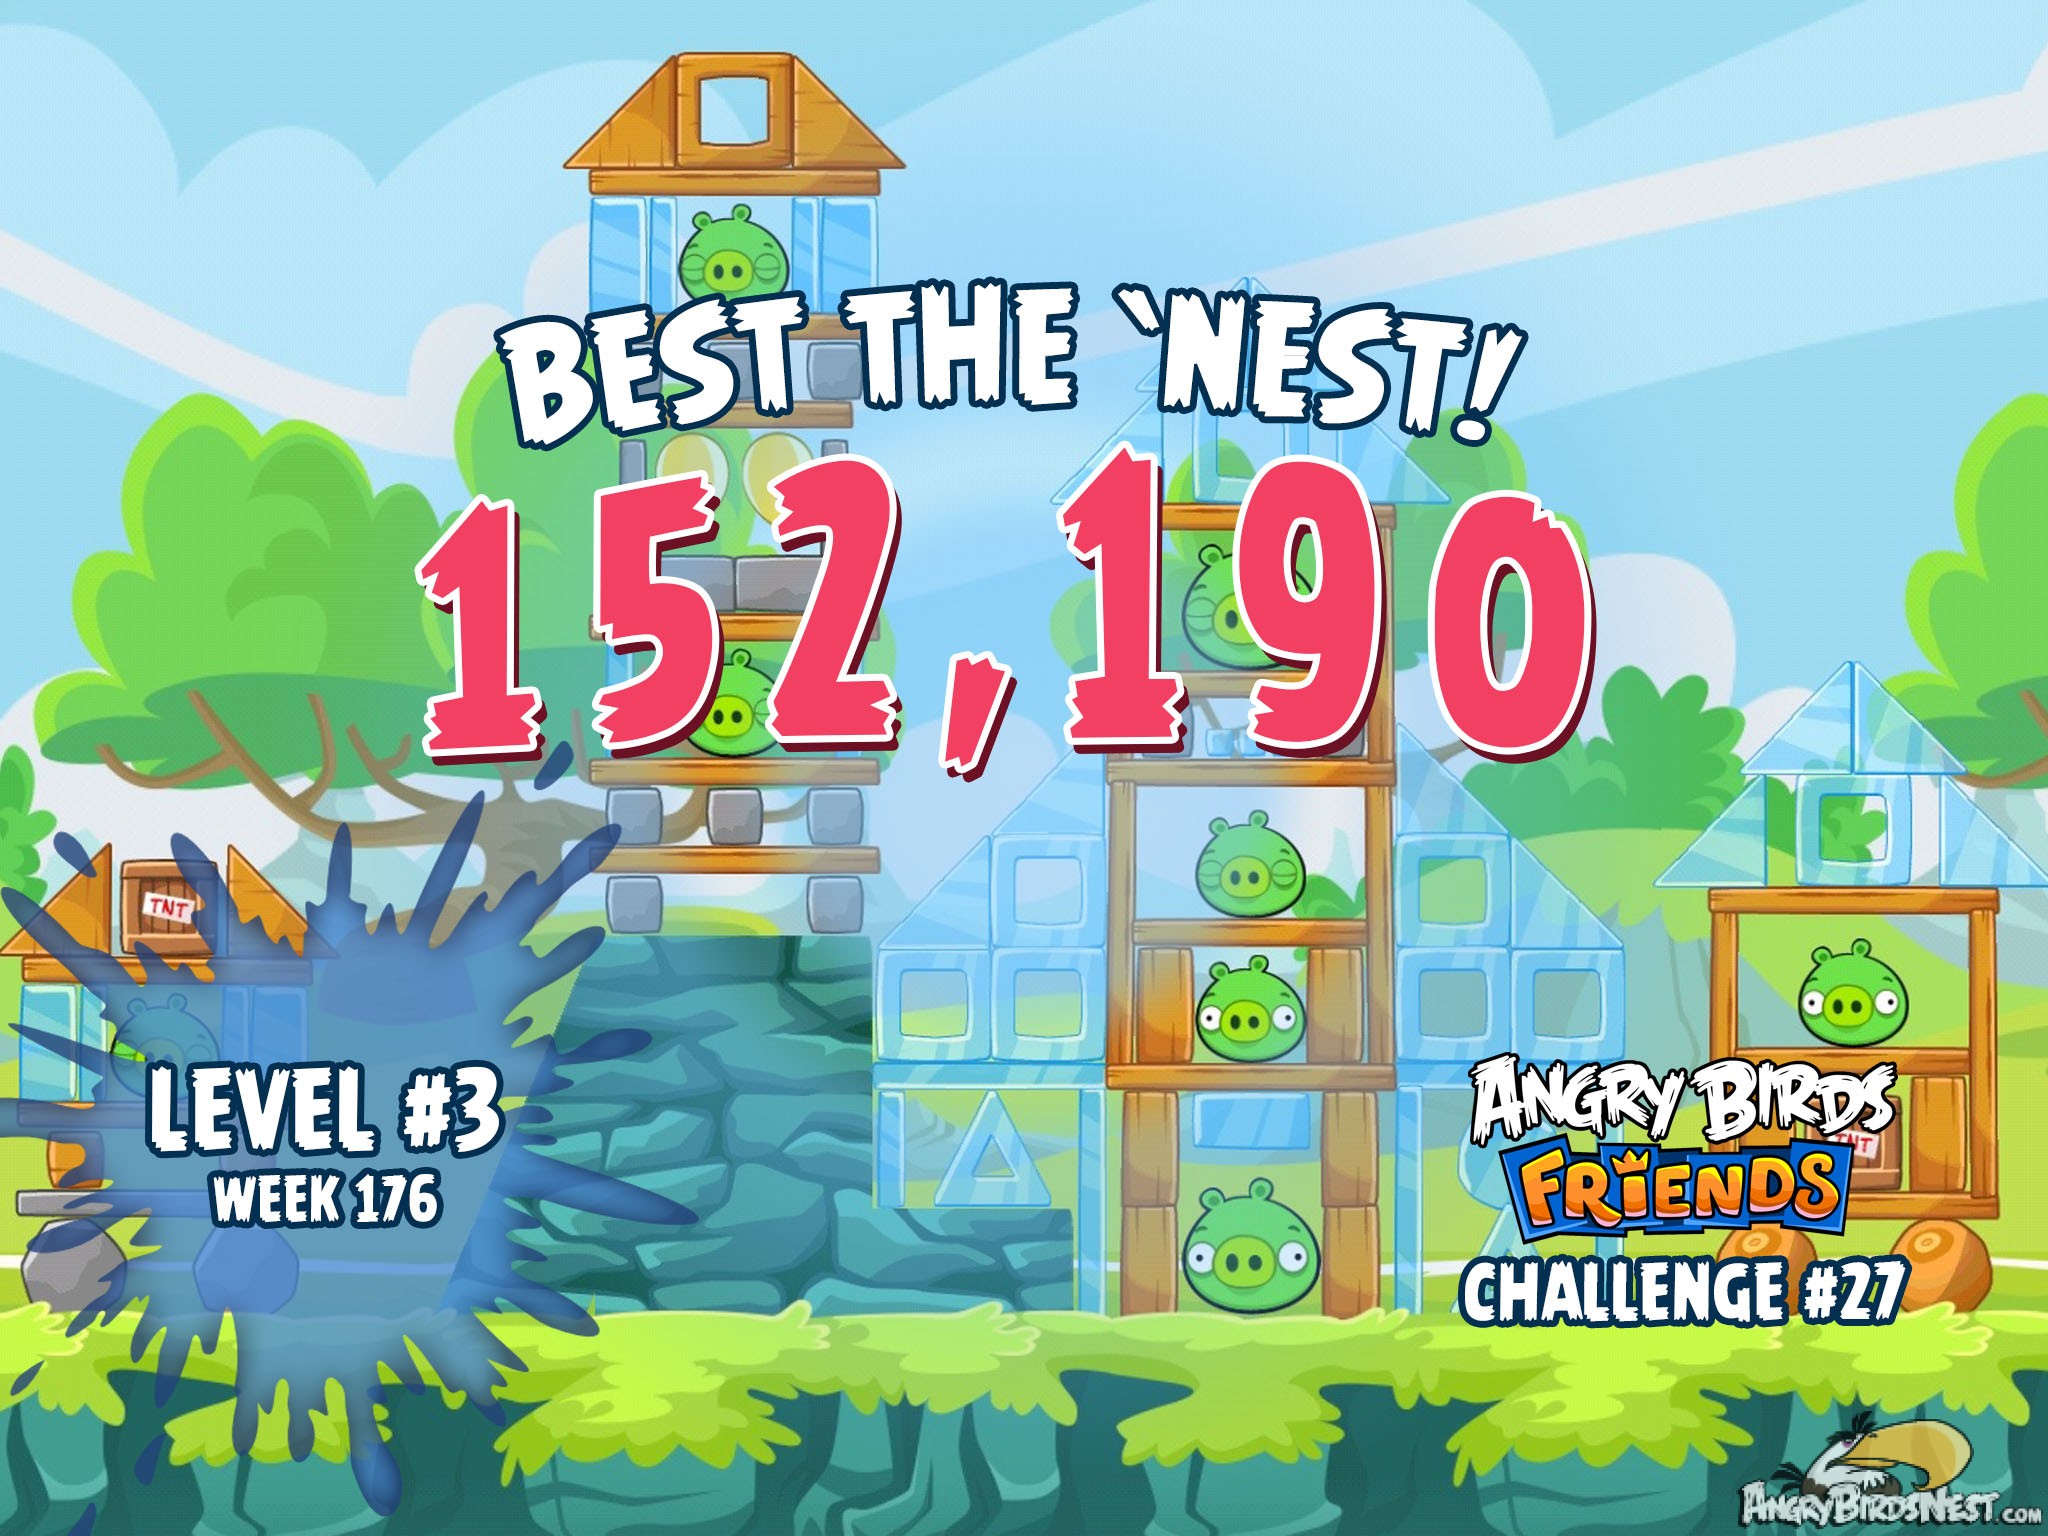 Angry Birds Friends Best the Nest Challenge Week 27